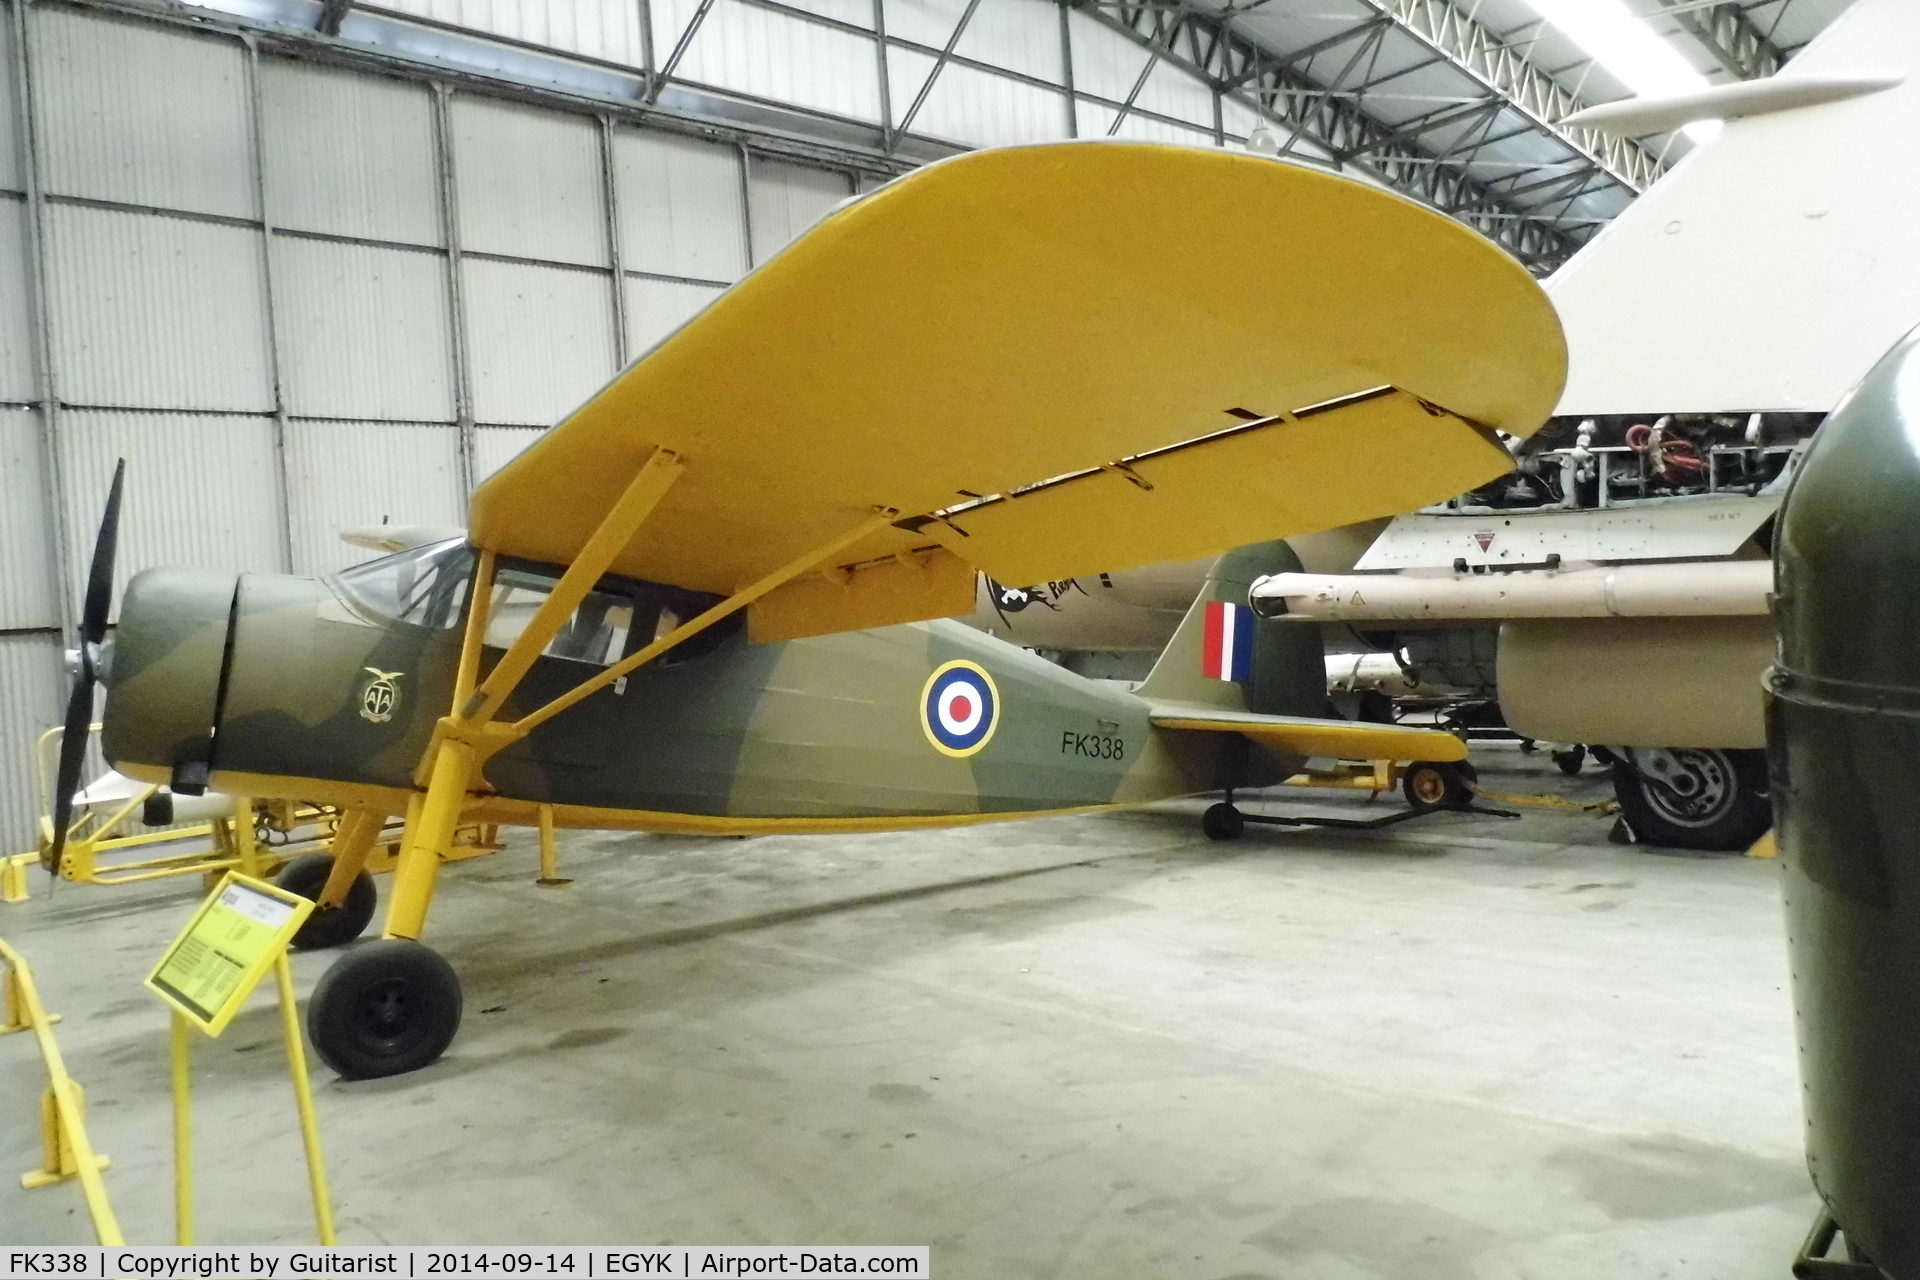 FK338, Fairchild UC-61 Argus I (24W-41A) C/N 347, Being displayed at the York Air Museum